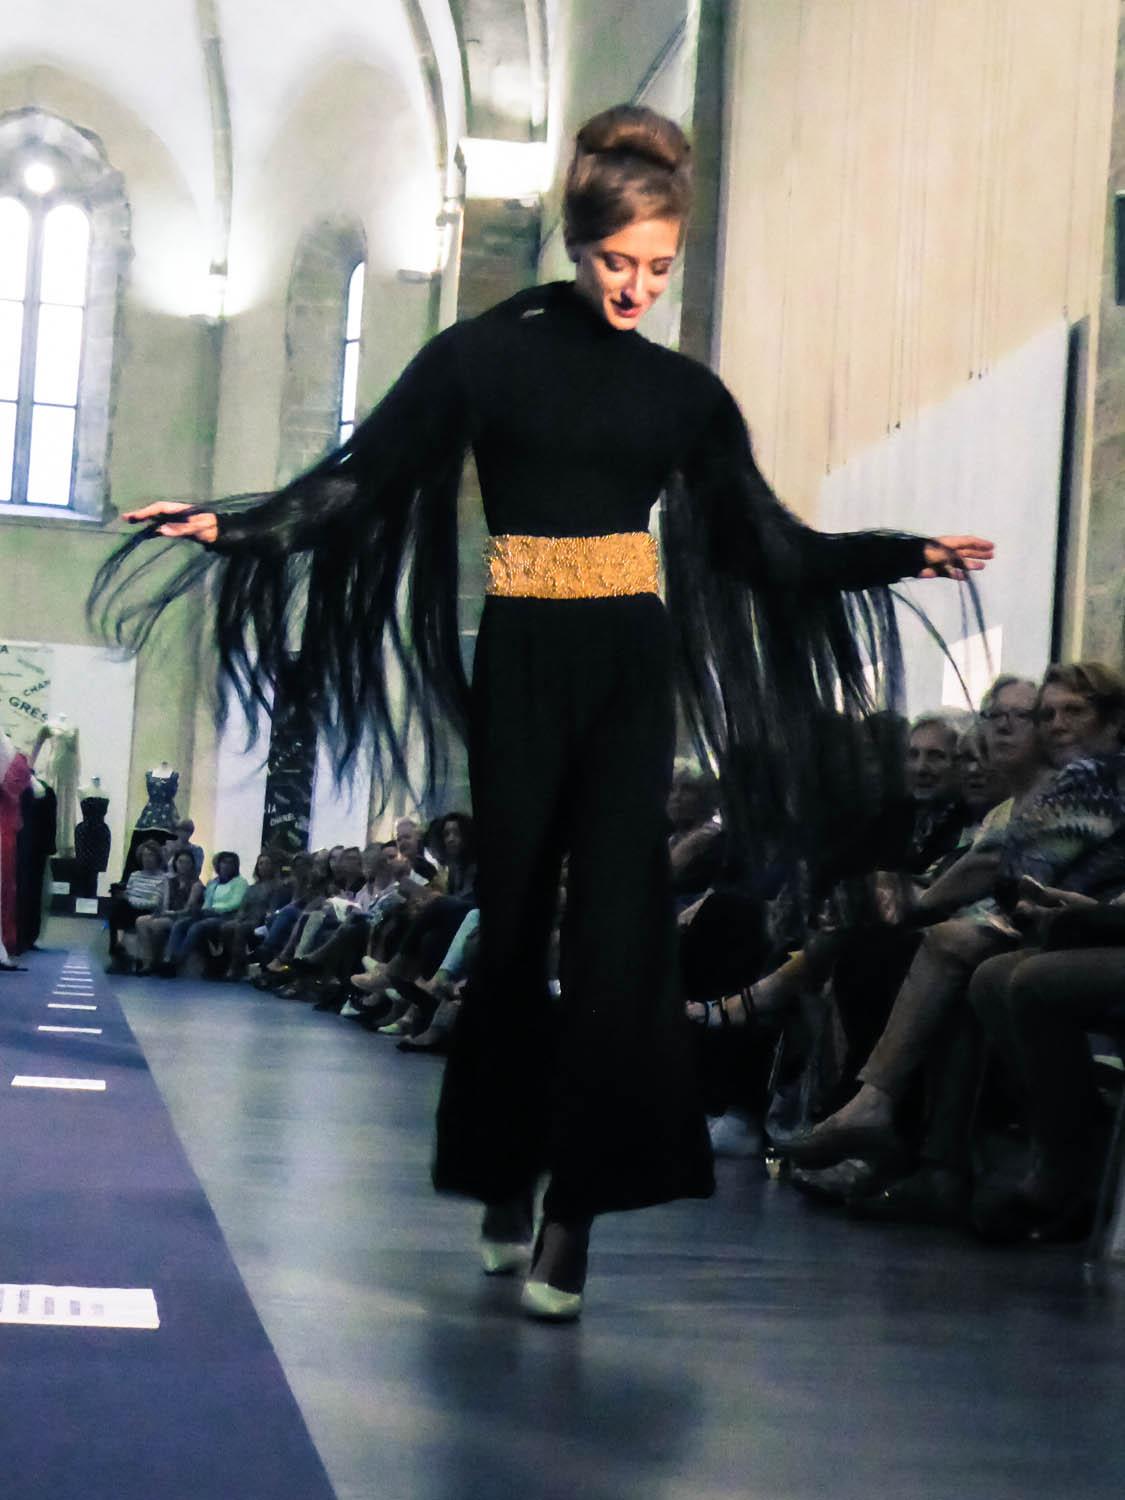 Fall Winter 2004 Collection
France

Jean-Louis Scherrer's Haute Couture fashion show Amazone set by Stéphane Rolland Look n ° 26 from the Fall Winter 2004 collection. Pants and top in black silk crepe. Amazing long sleeves covered with black